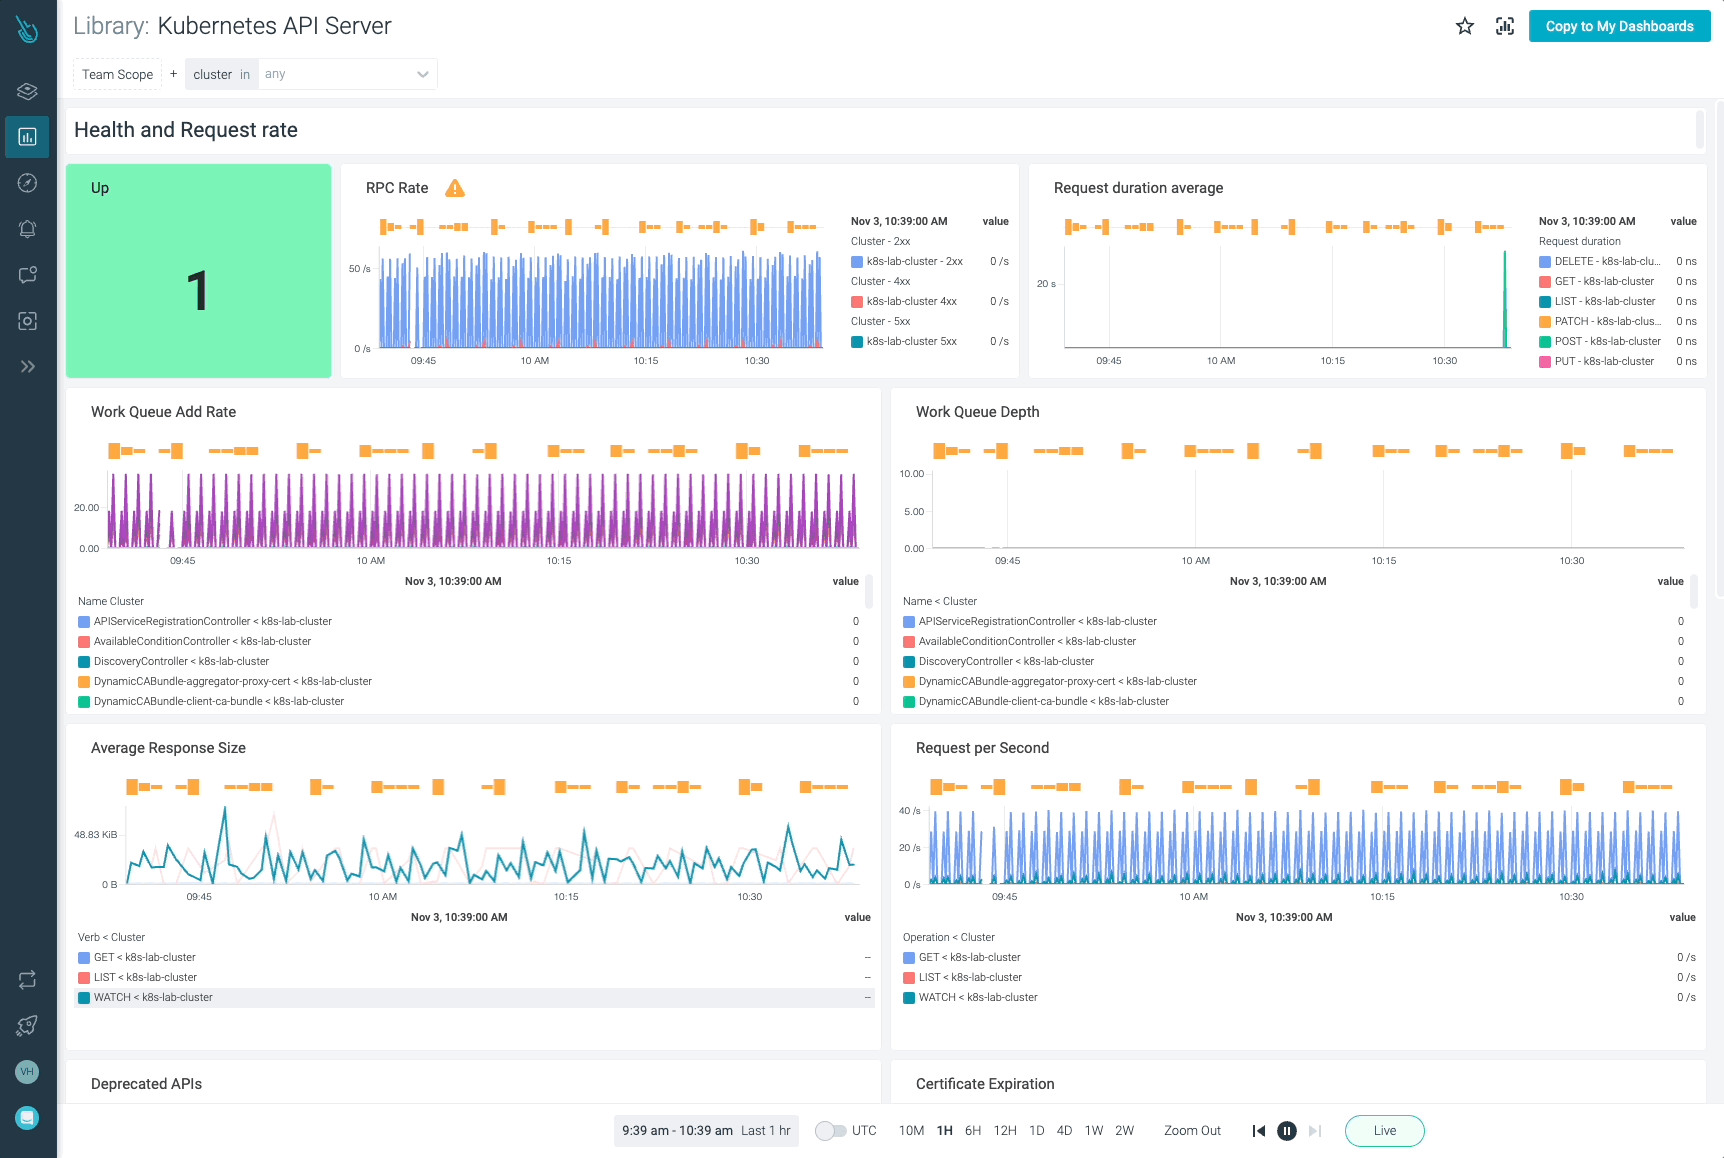 Thanks to the Sysdig Monitor out-of-the-box dashboards, you'll have all the Kubernetes API Server metrics handy.